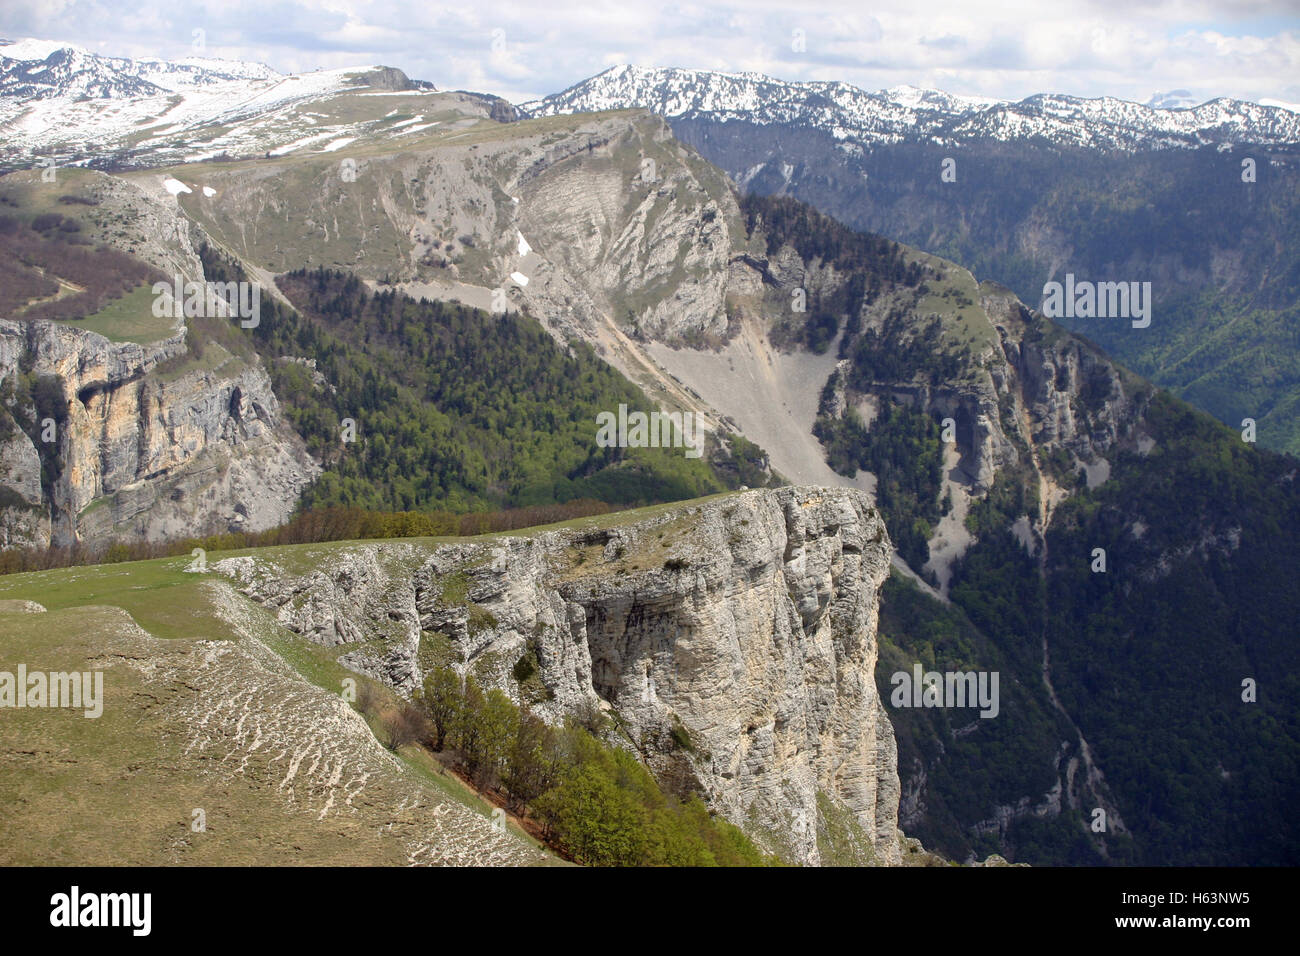 French lower alpine valley landscape Stock Photo